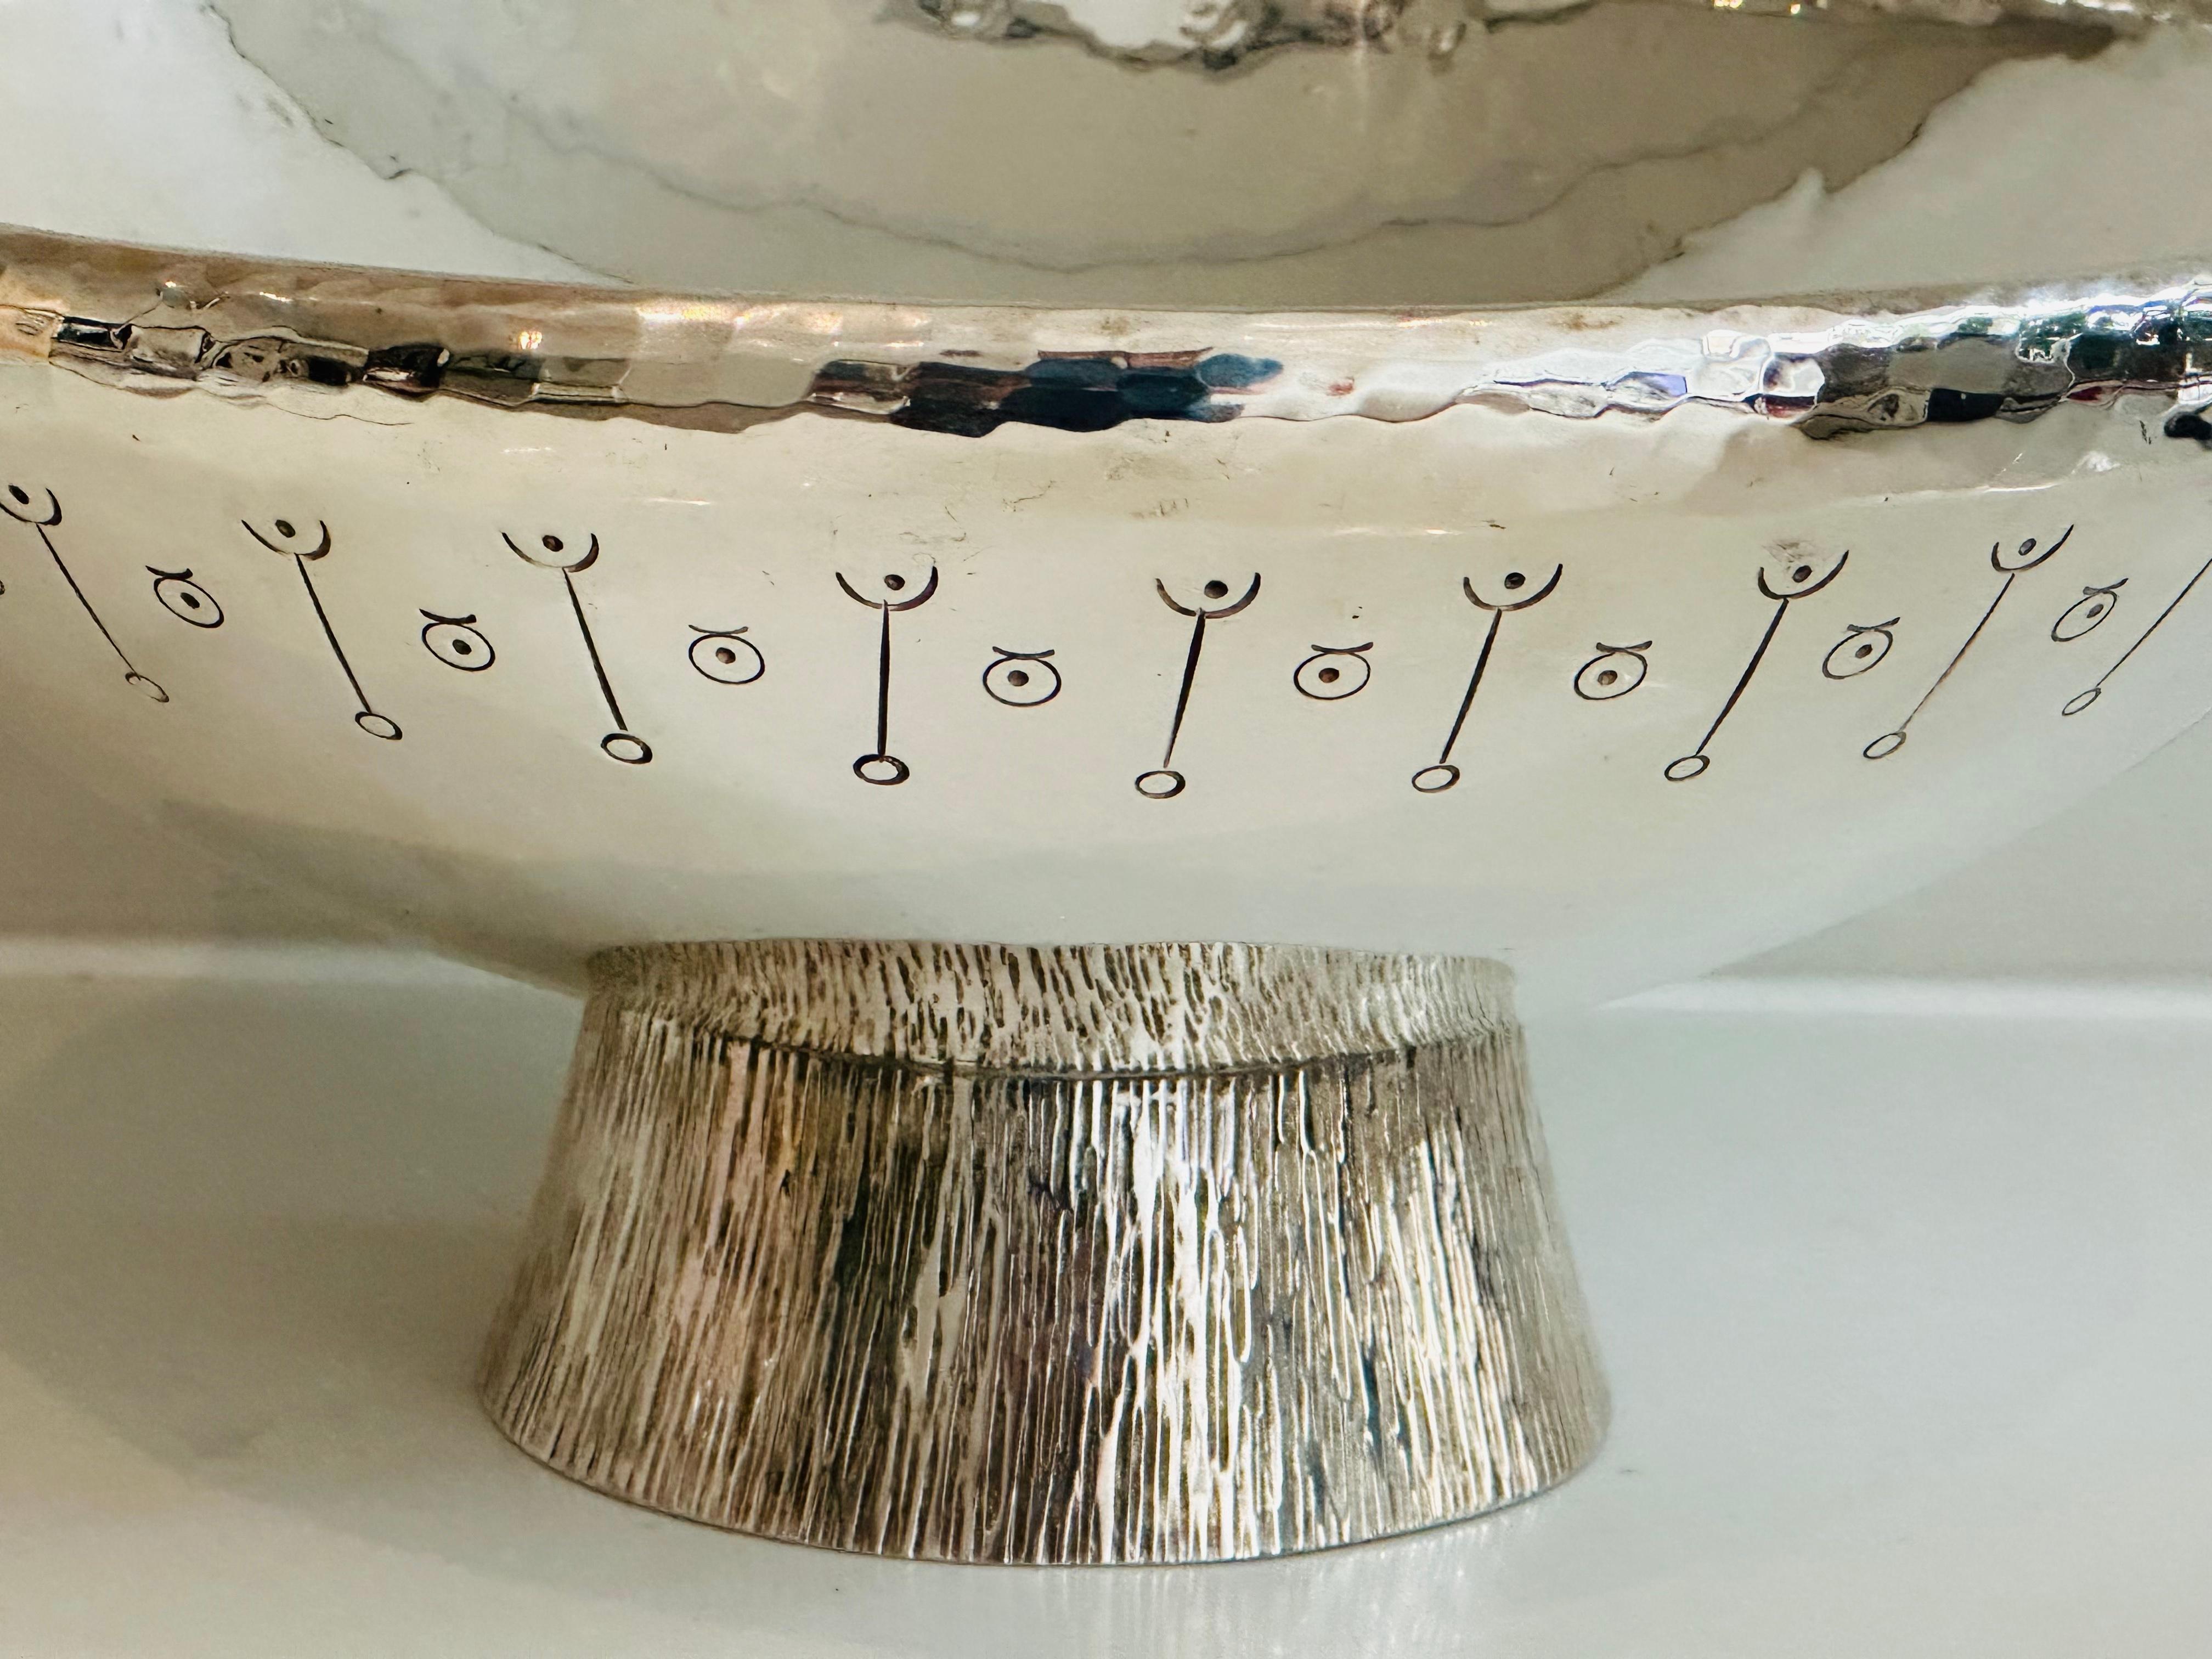 1980s English Silver Plated Decorative Hand-Hammered Serving or Display Bowl 10